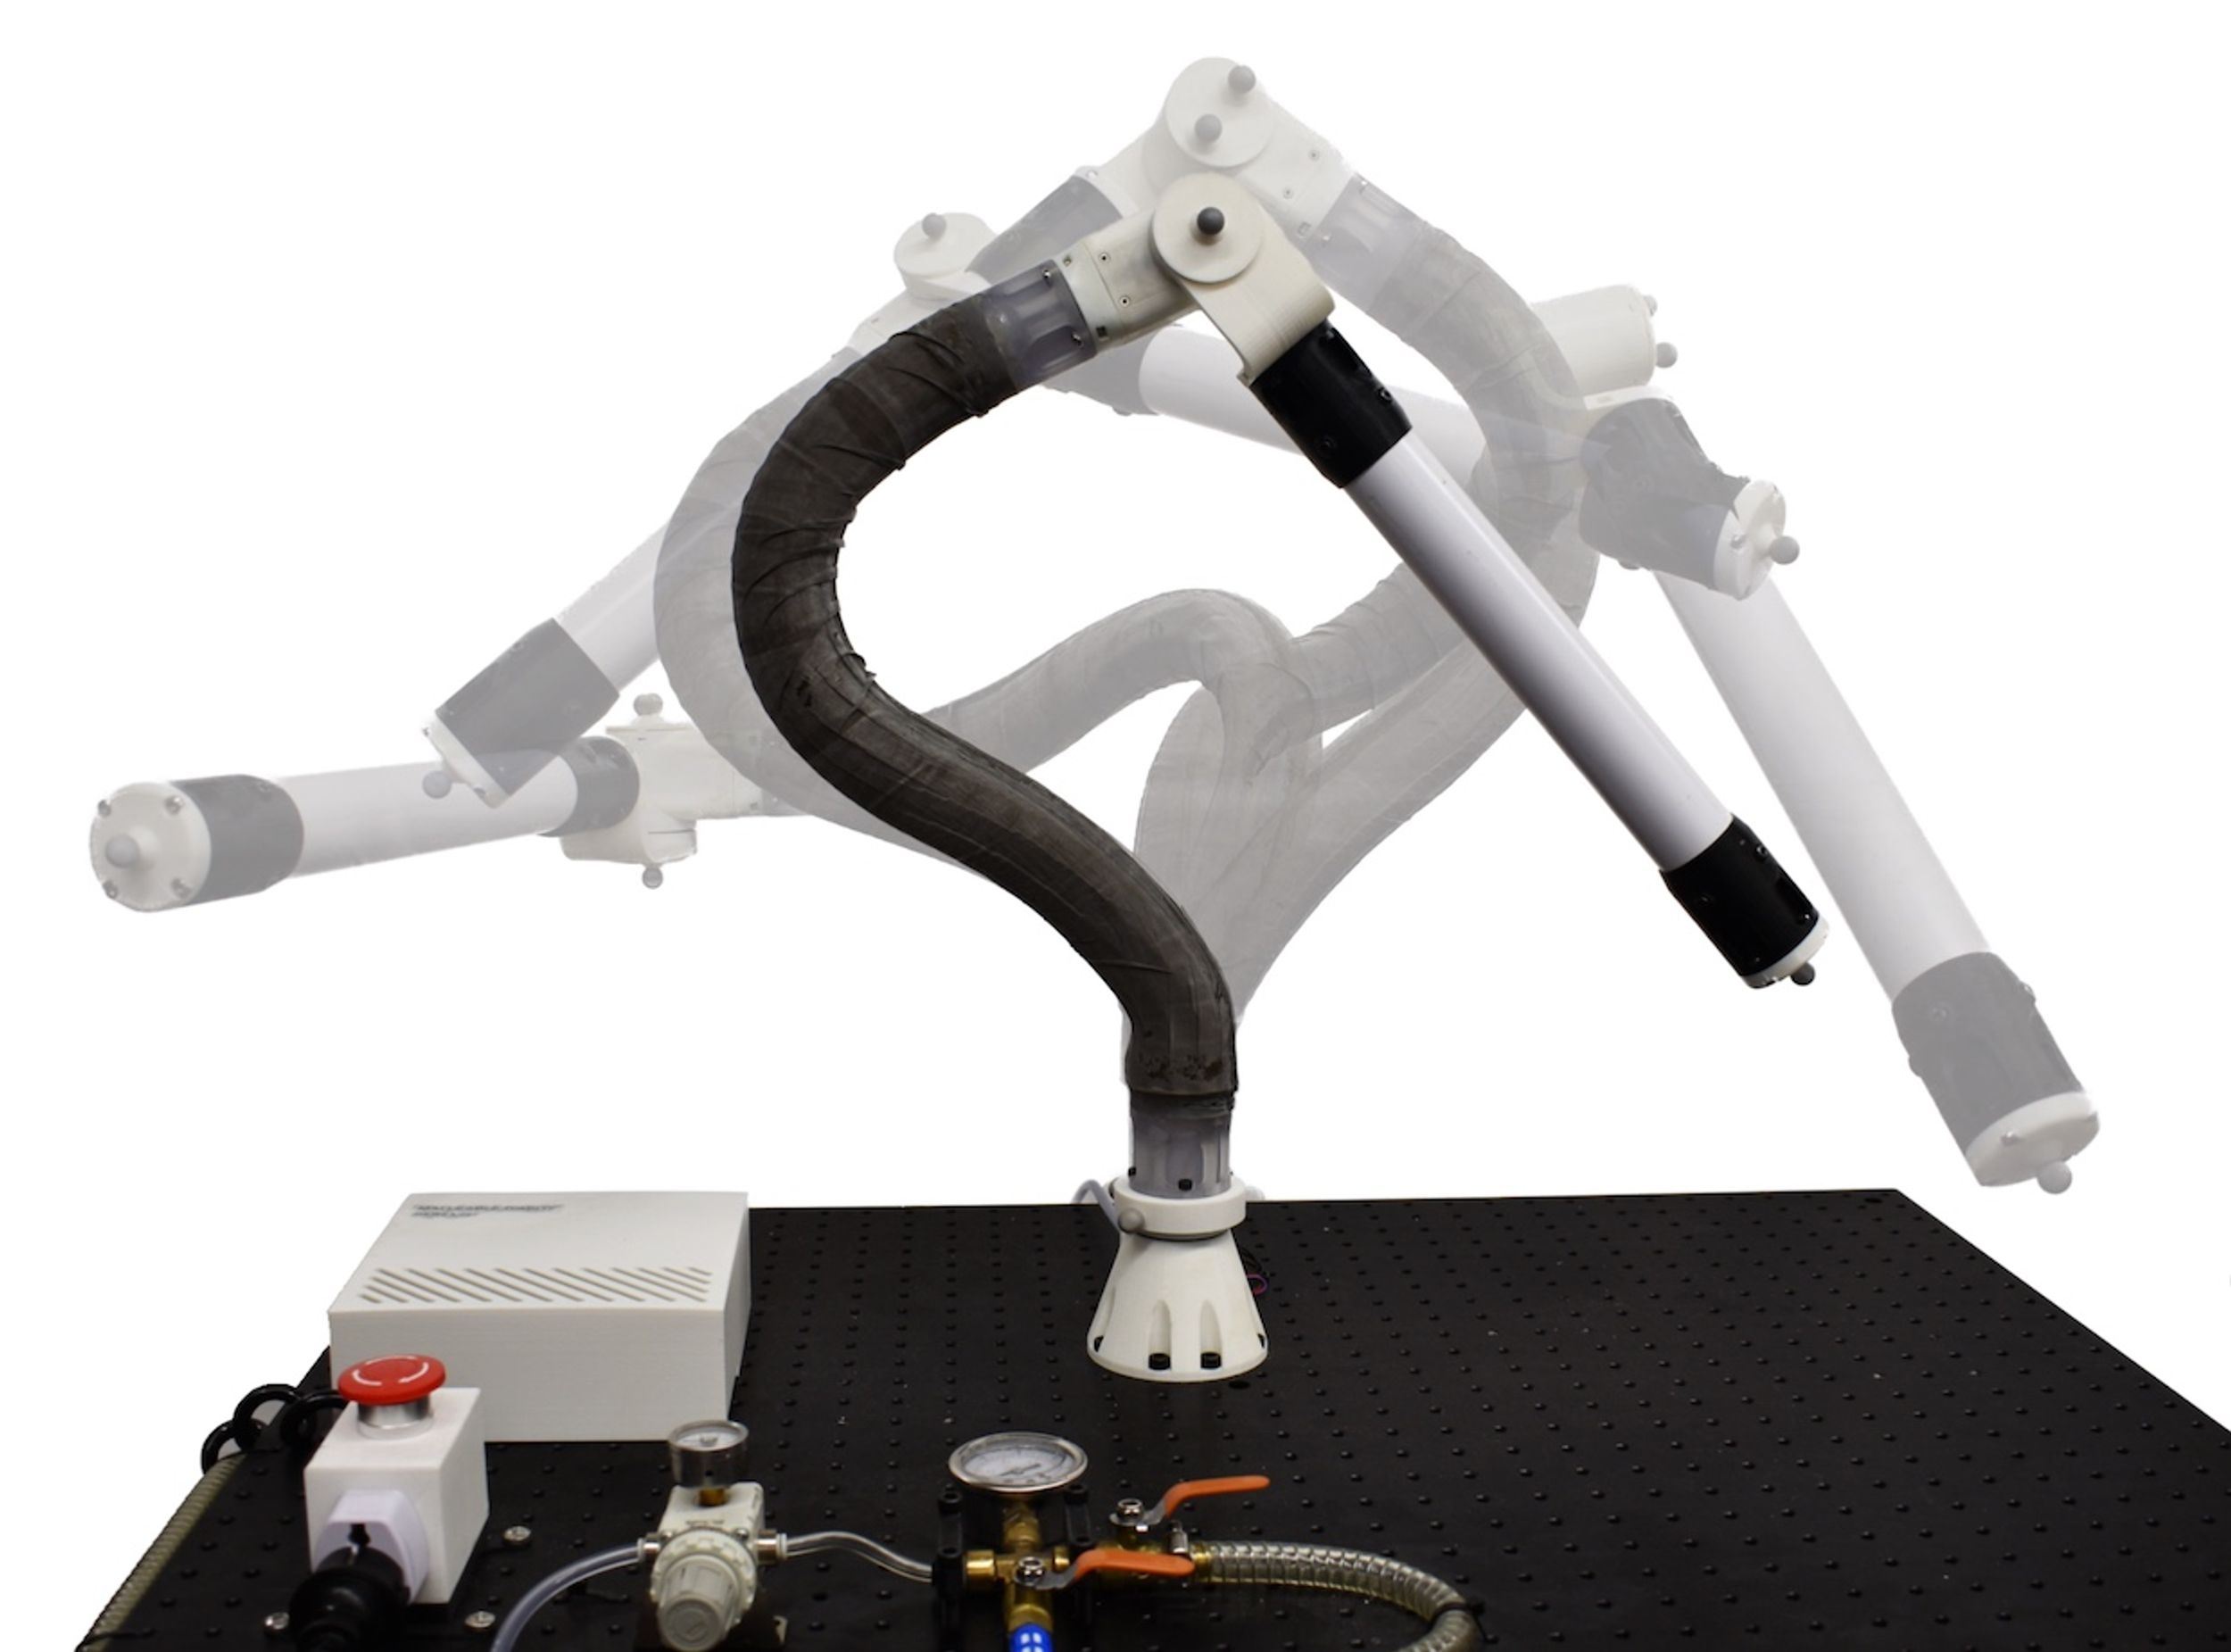 Malleable robot arm